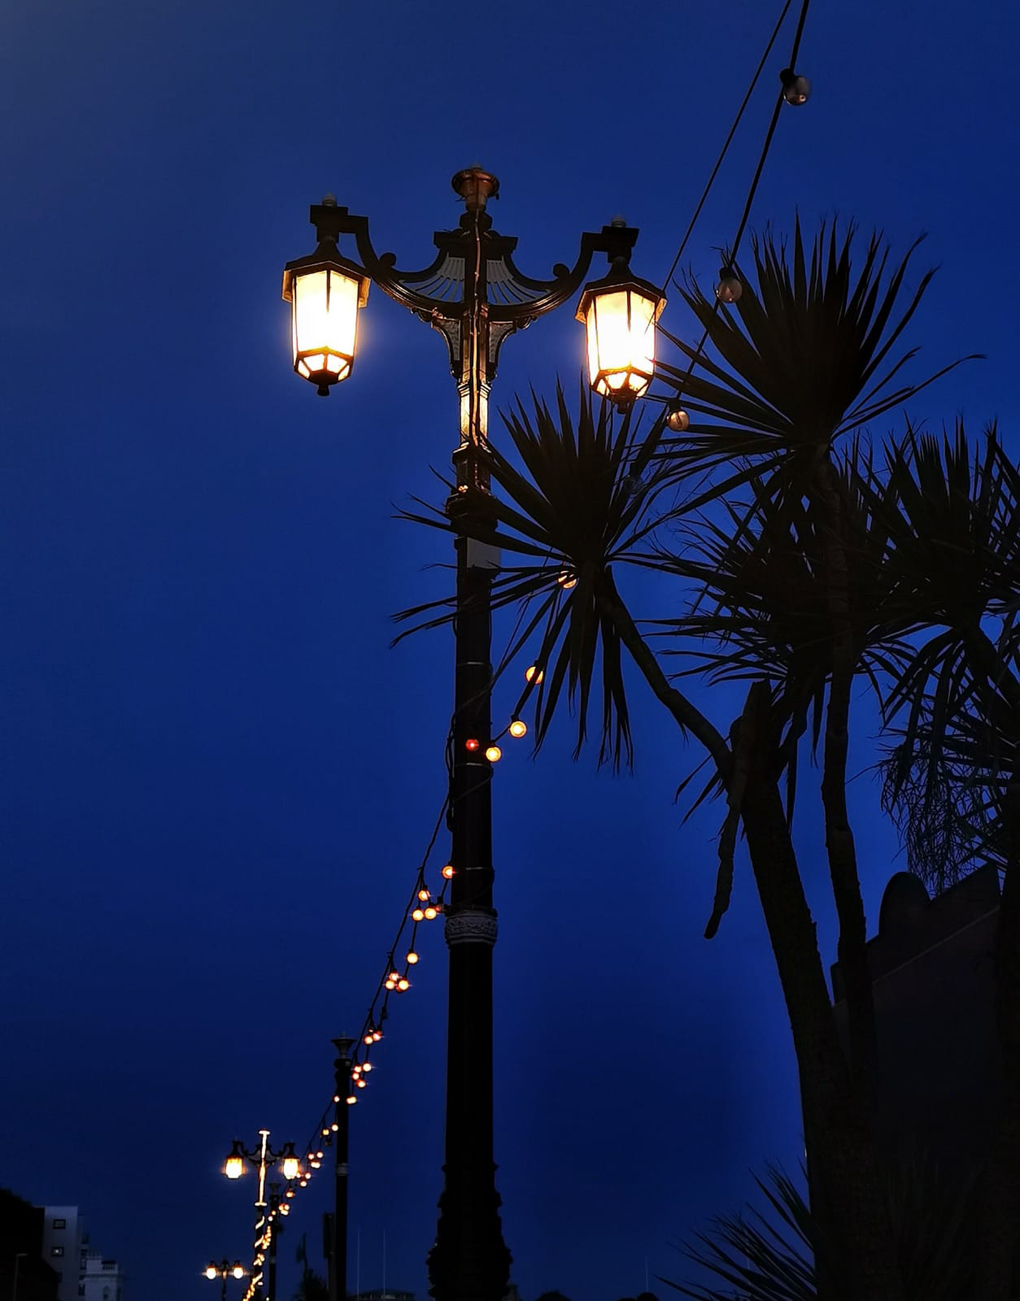 Double lamp post lit at night